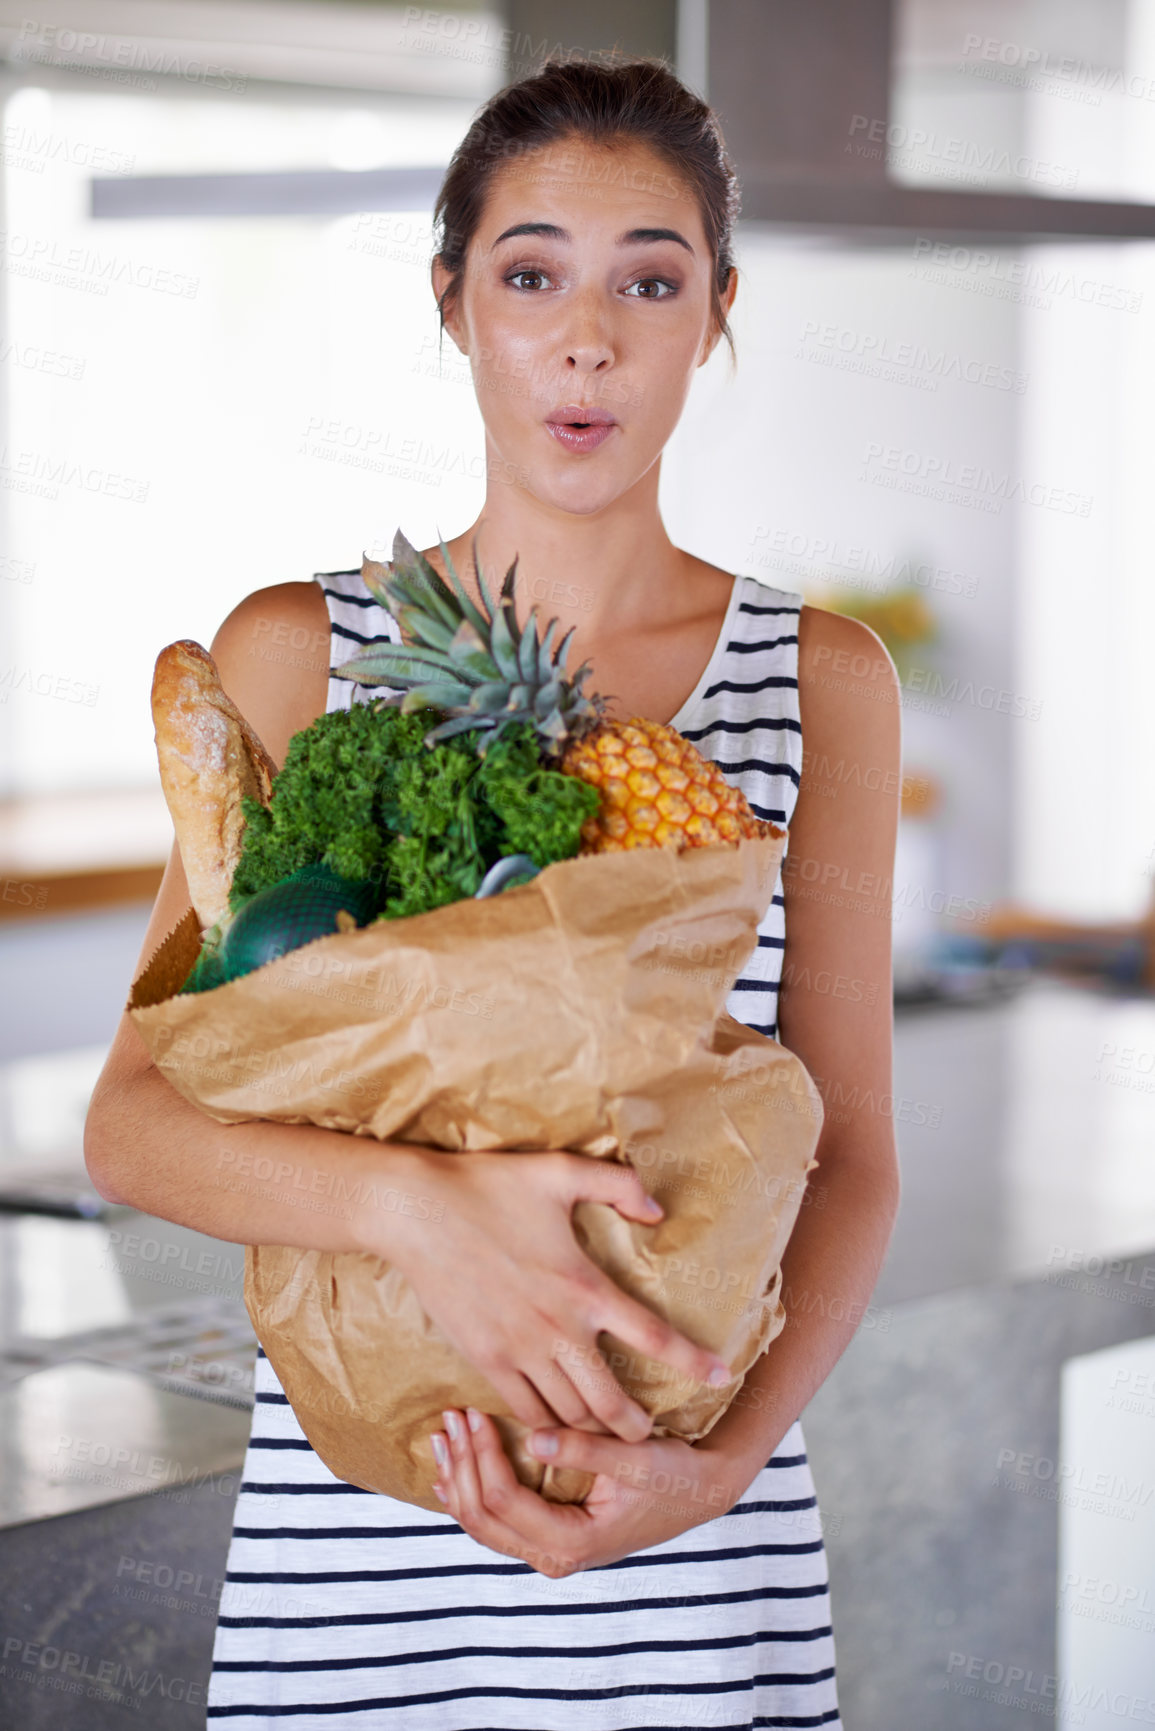 Buy stock photo Home, shock or portrait of woman with groceries on promotion, sale or discounts deal on nutrition. Wow, delivery offer surprise or person buying healthy food for cooking organic fruits or diet choice